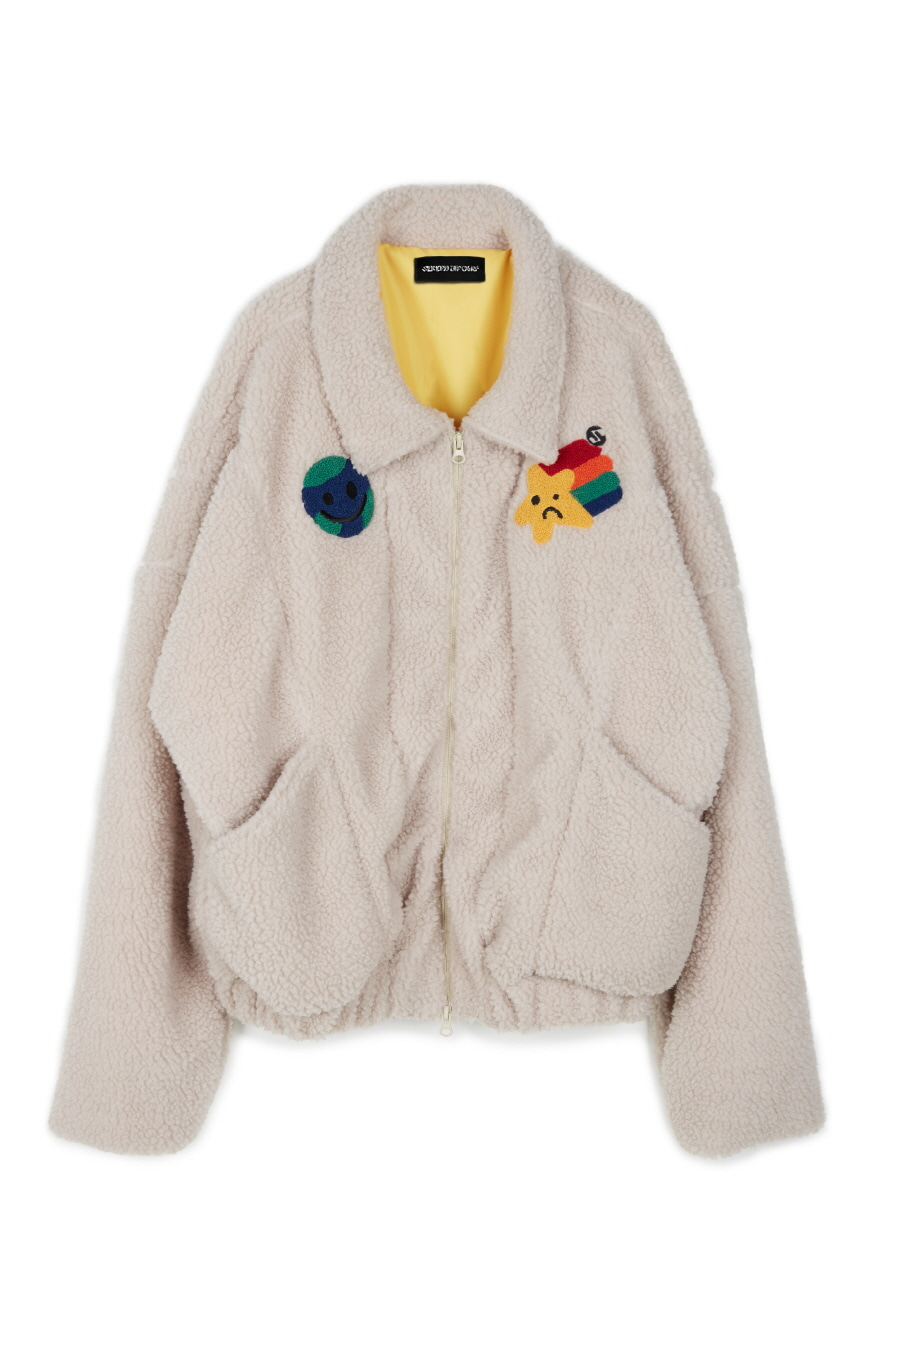 Shooting Star Embroidered Sherpa Fleece Jacket - Ivory